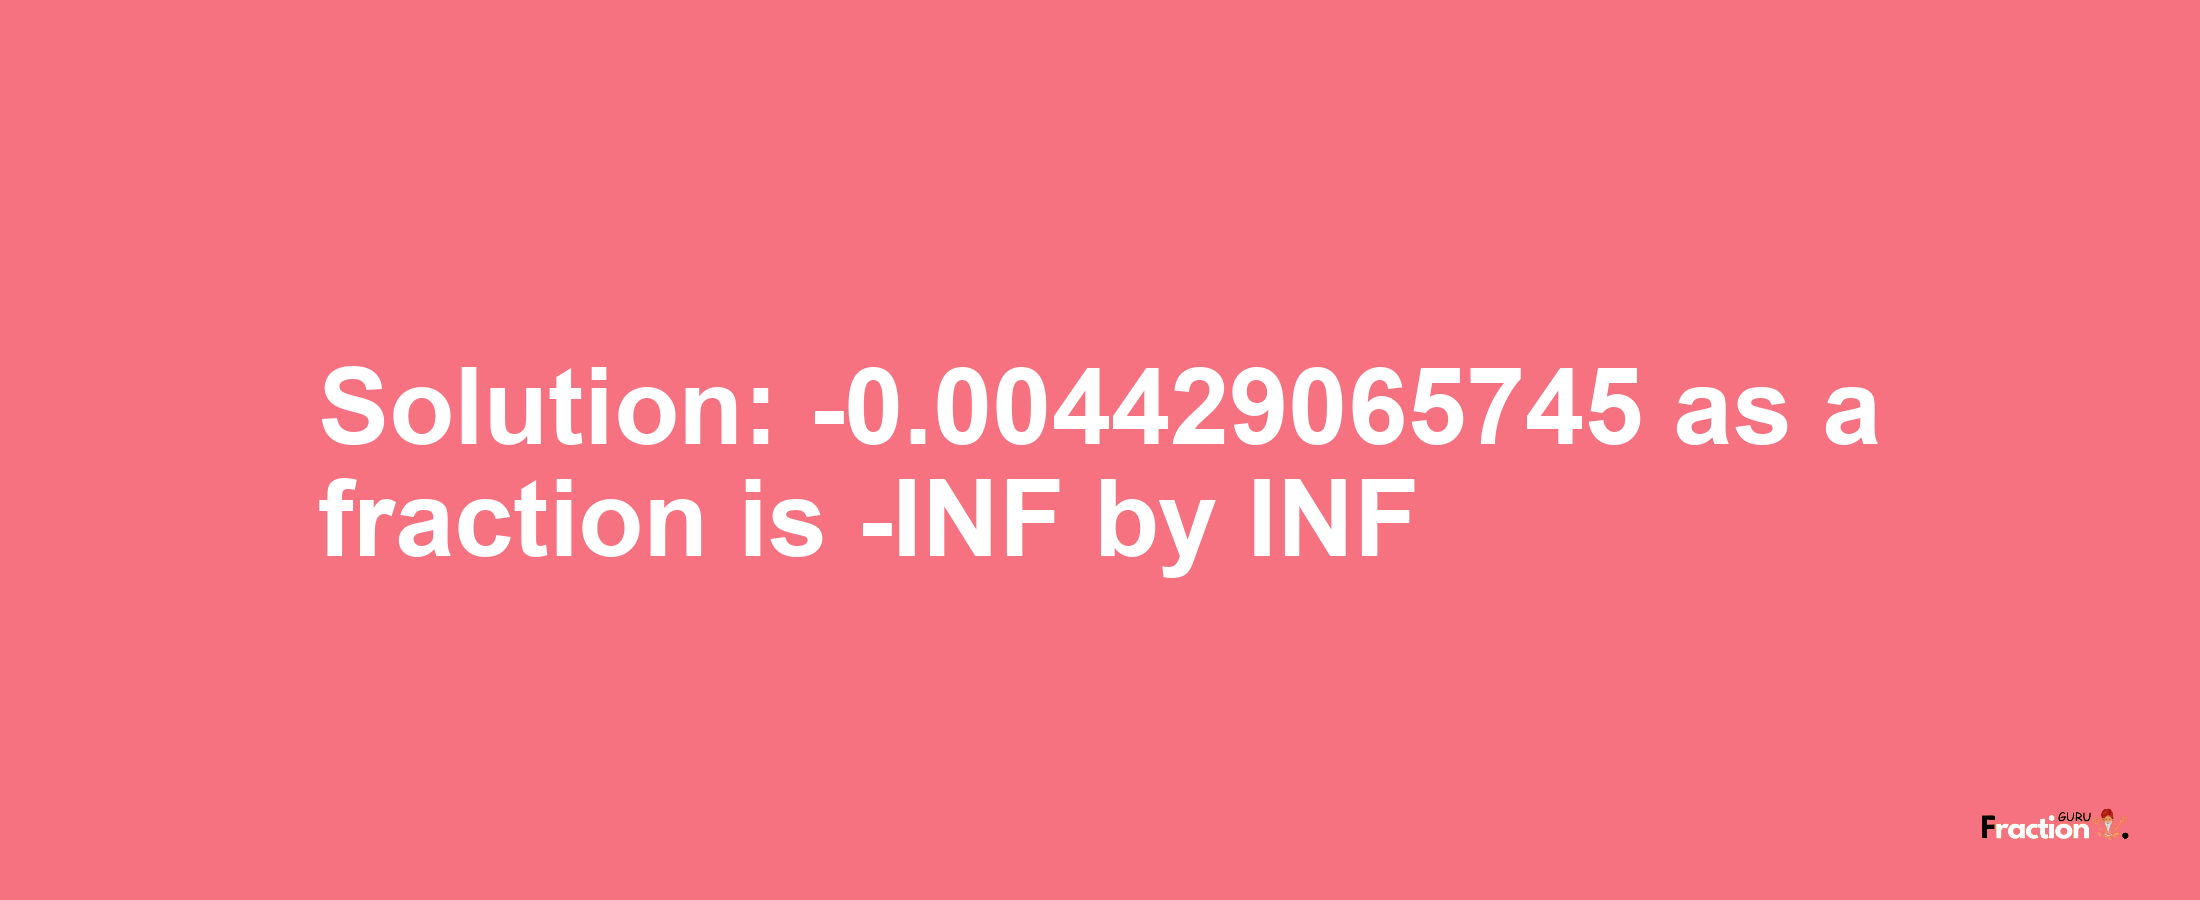 Solution:-0.004429065745 as a fraction is -INF/INF